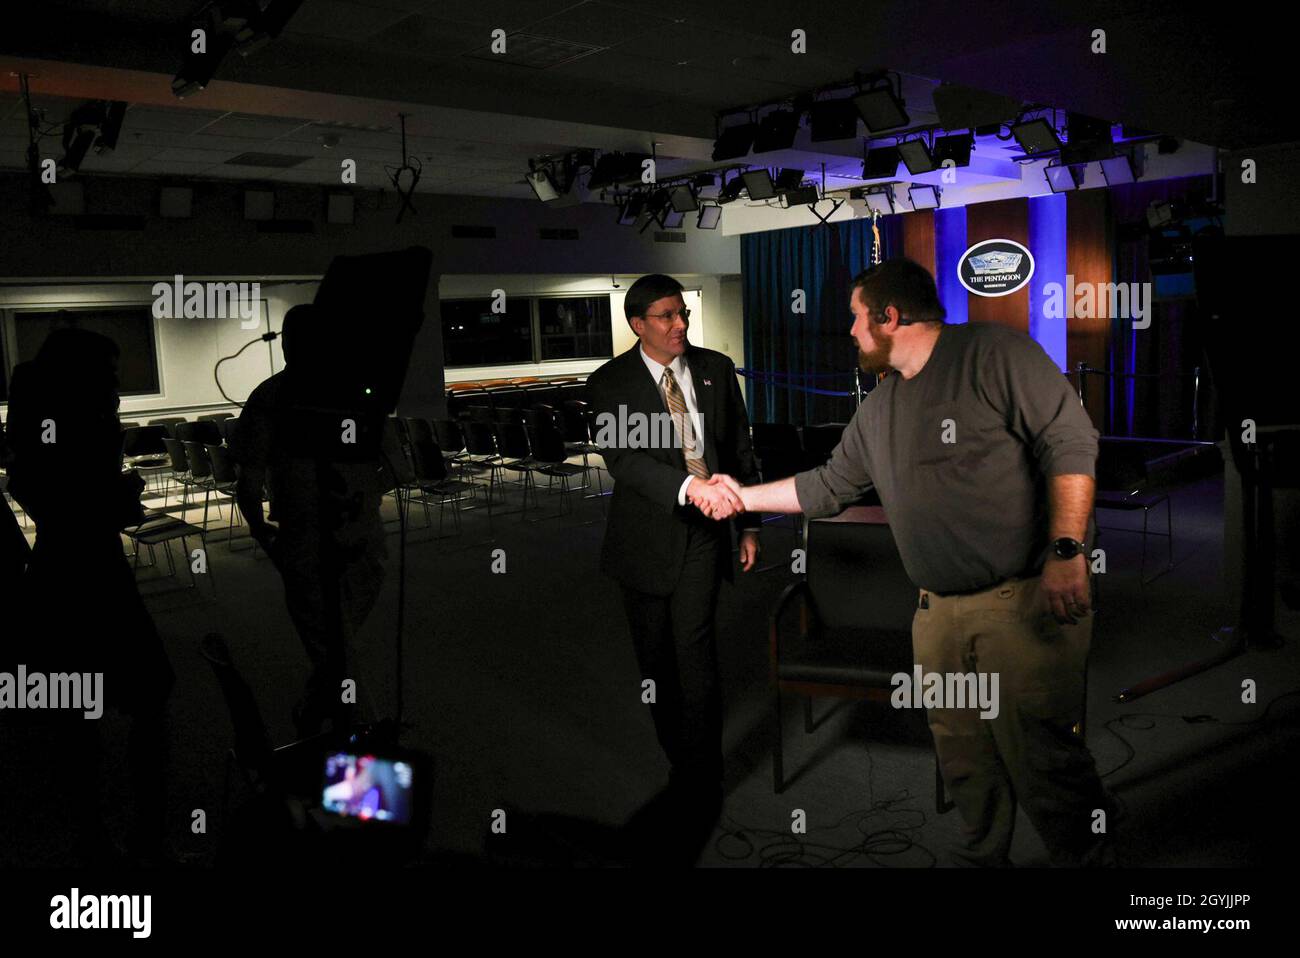 Defense Secretary Mark T. Esper shakes hands with staff as he finishes a video interview with CNN International's Christiane Amanpour, at the Pentagon, Washington, D.C., Jan. 7, 2020. (DoD photo by Navy Petty Officer 2nd Class James K. Lee) Stock Photo